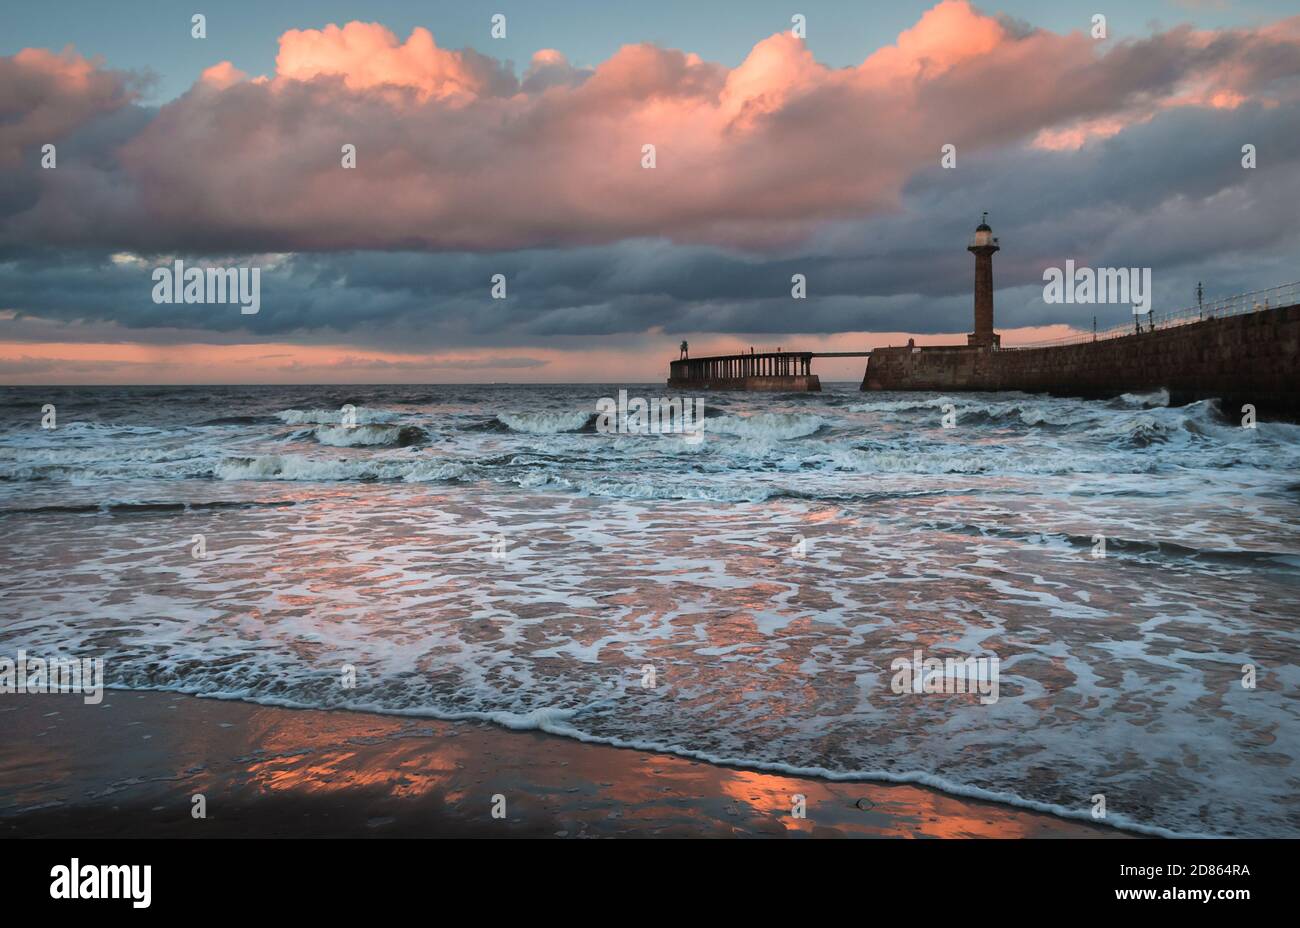 Pier at Whitby, North Yorkshire fishing port and historic seaside town on the River Esk. Dramatic evening light and stormy seas Stock Photo